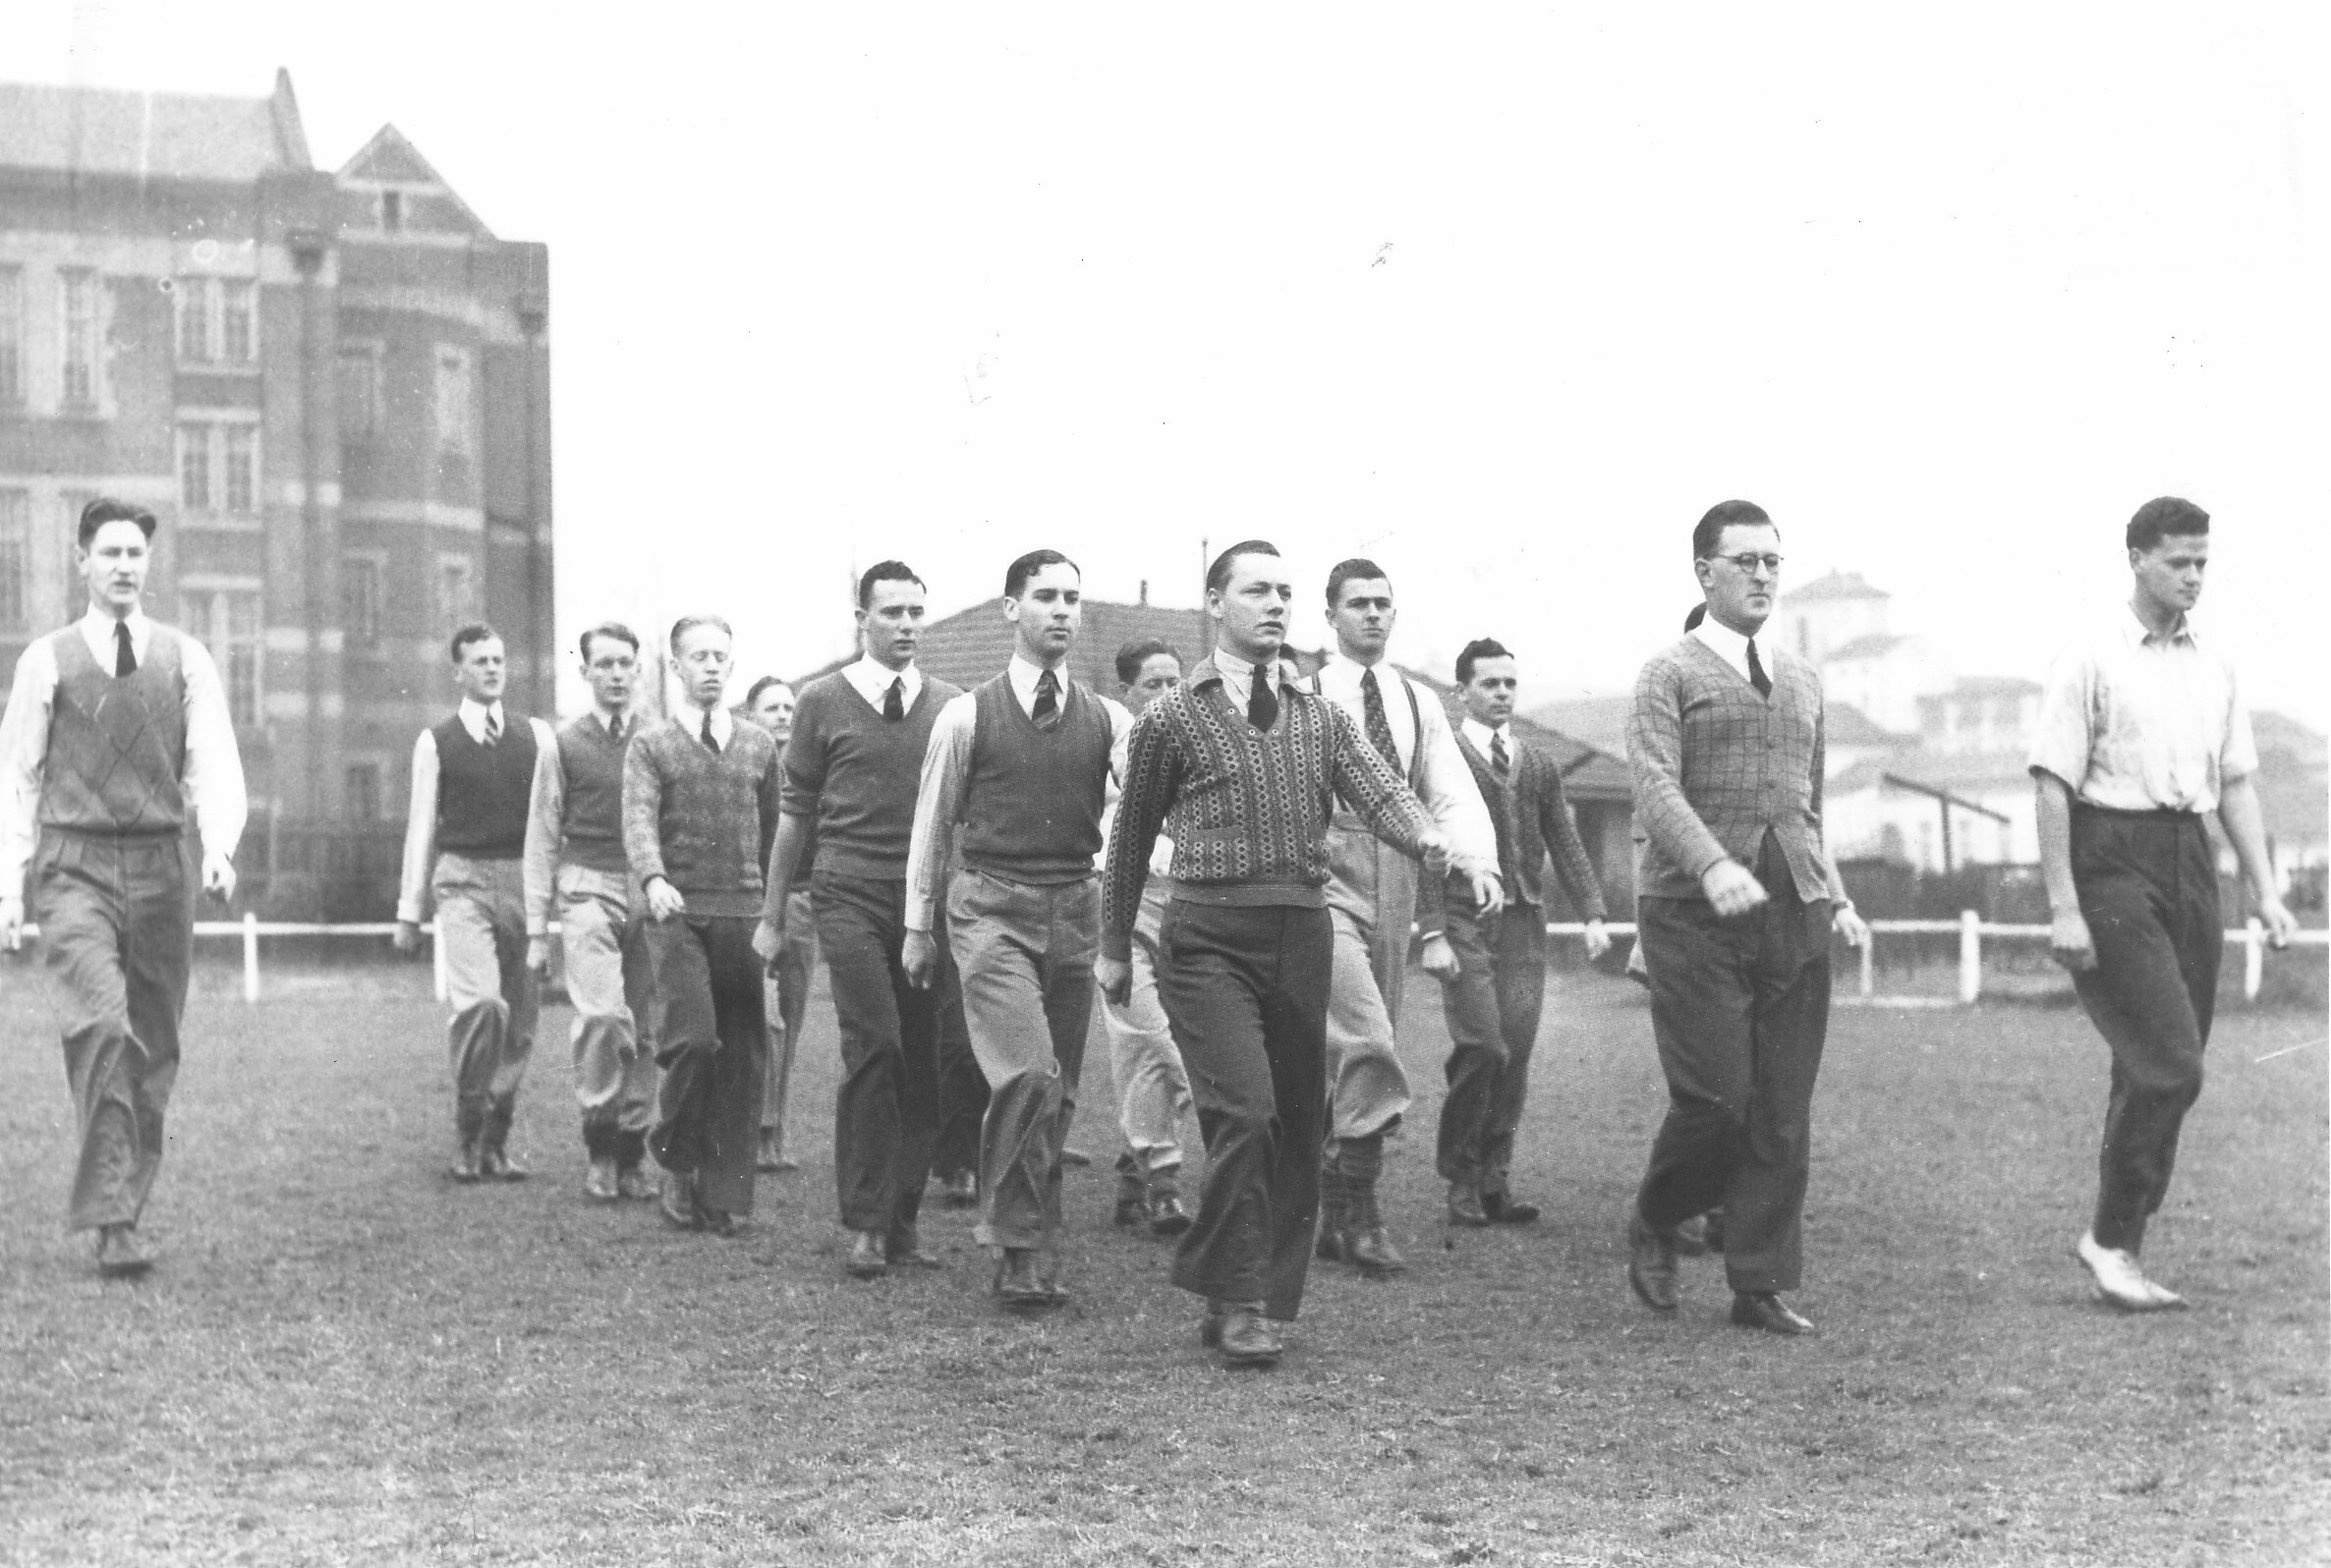 STUDENT VOLUNTARY TRAINING CORPS MARCHING